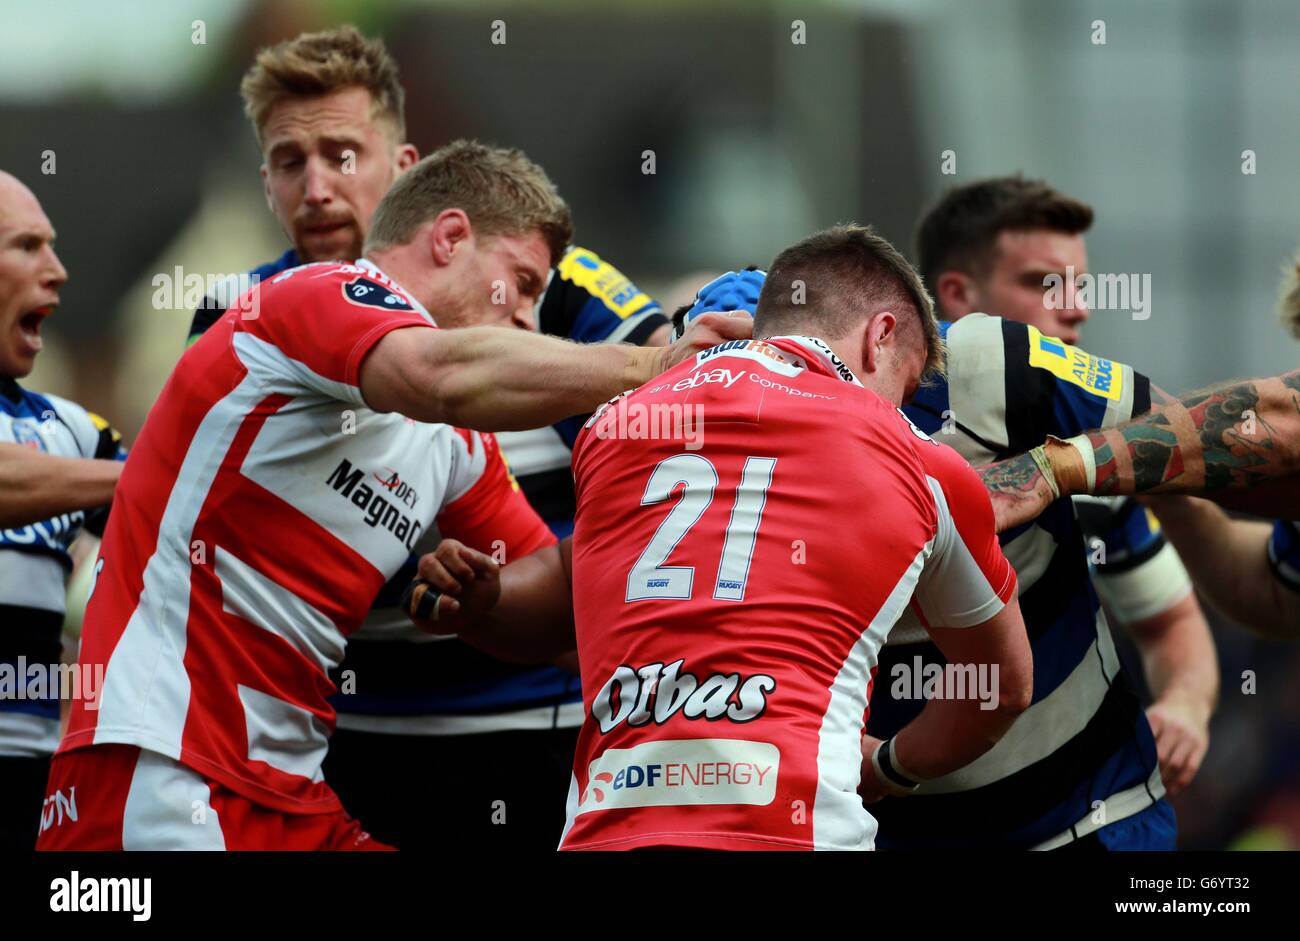 Fighting breaks out between Gloucester and Bath players after Bath are awarded a penalty try during the Aviva Premiership match at Kingsholm Stadium, Gloucester. Stock Photo